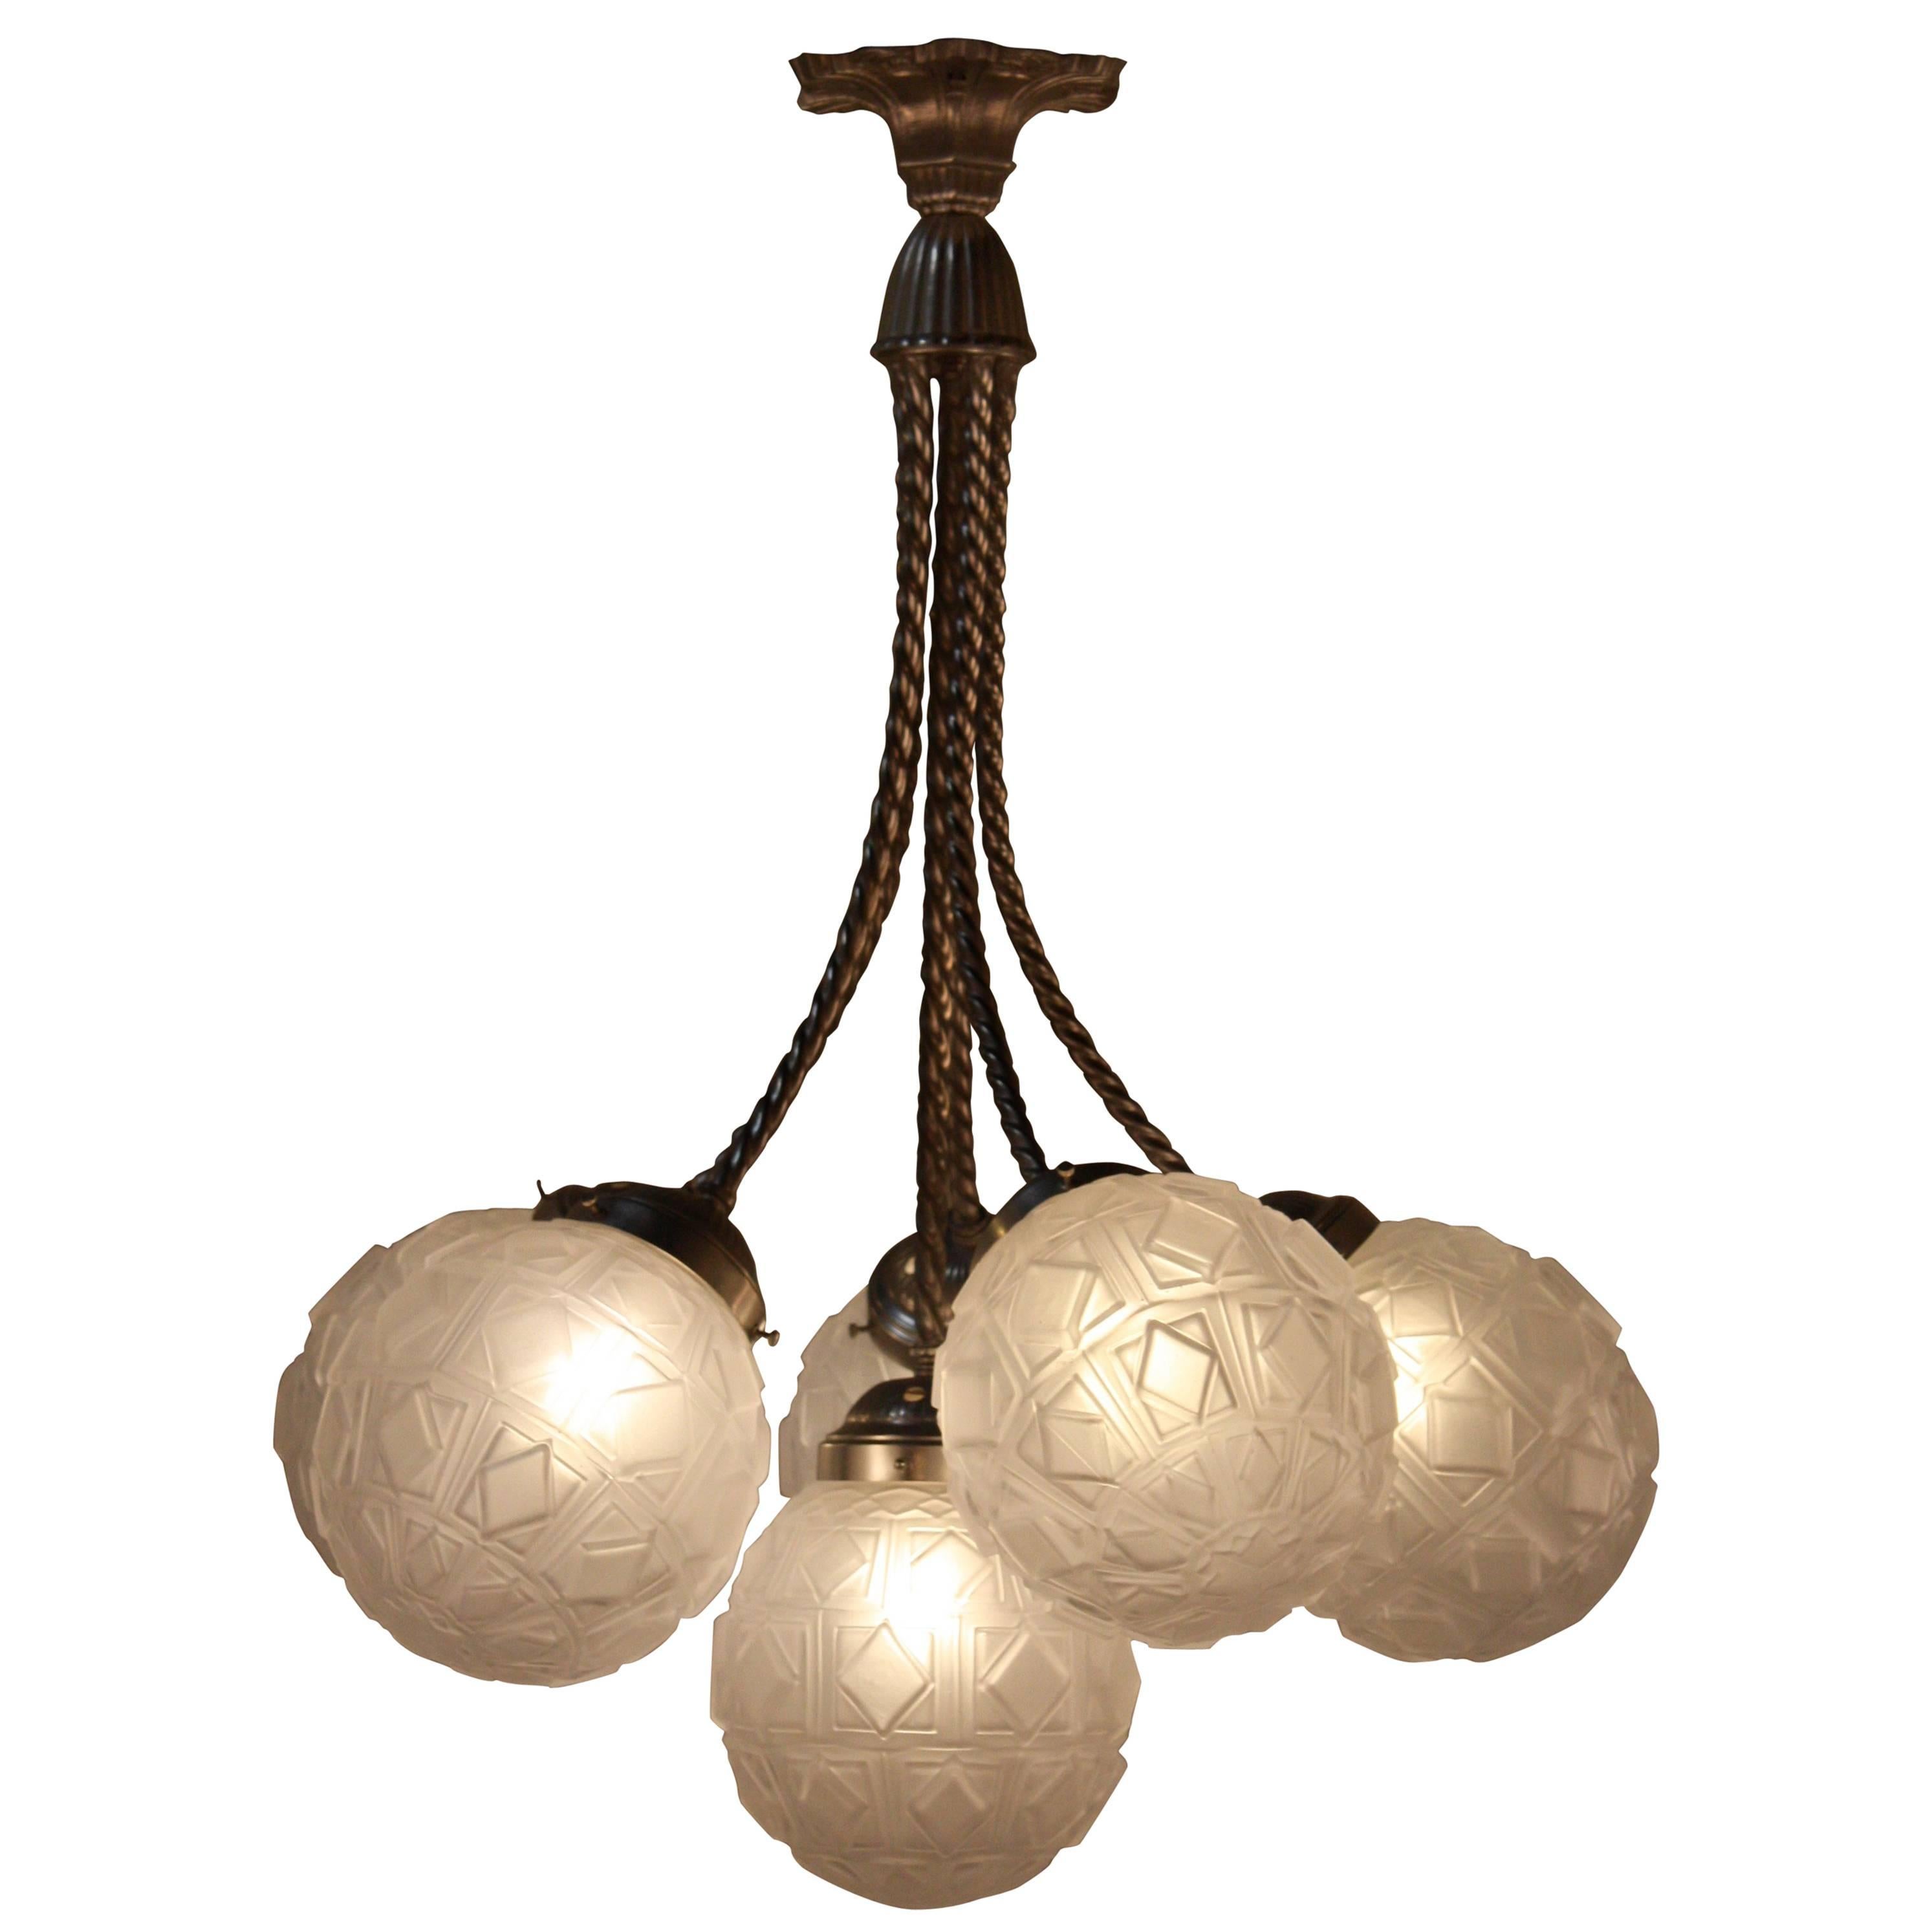 French Art Deco Chandelier with Six Glass Globe Shades